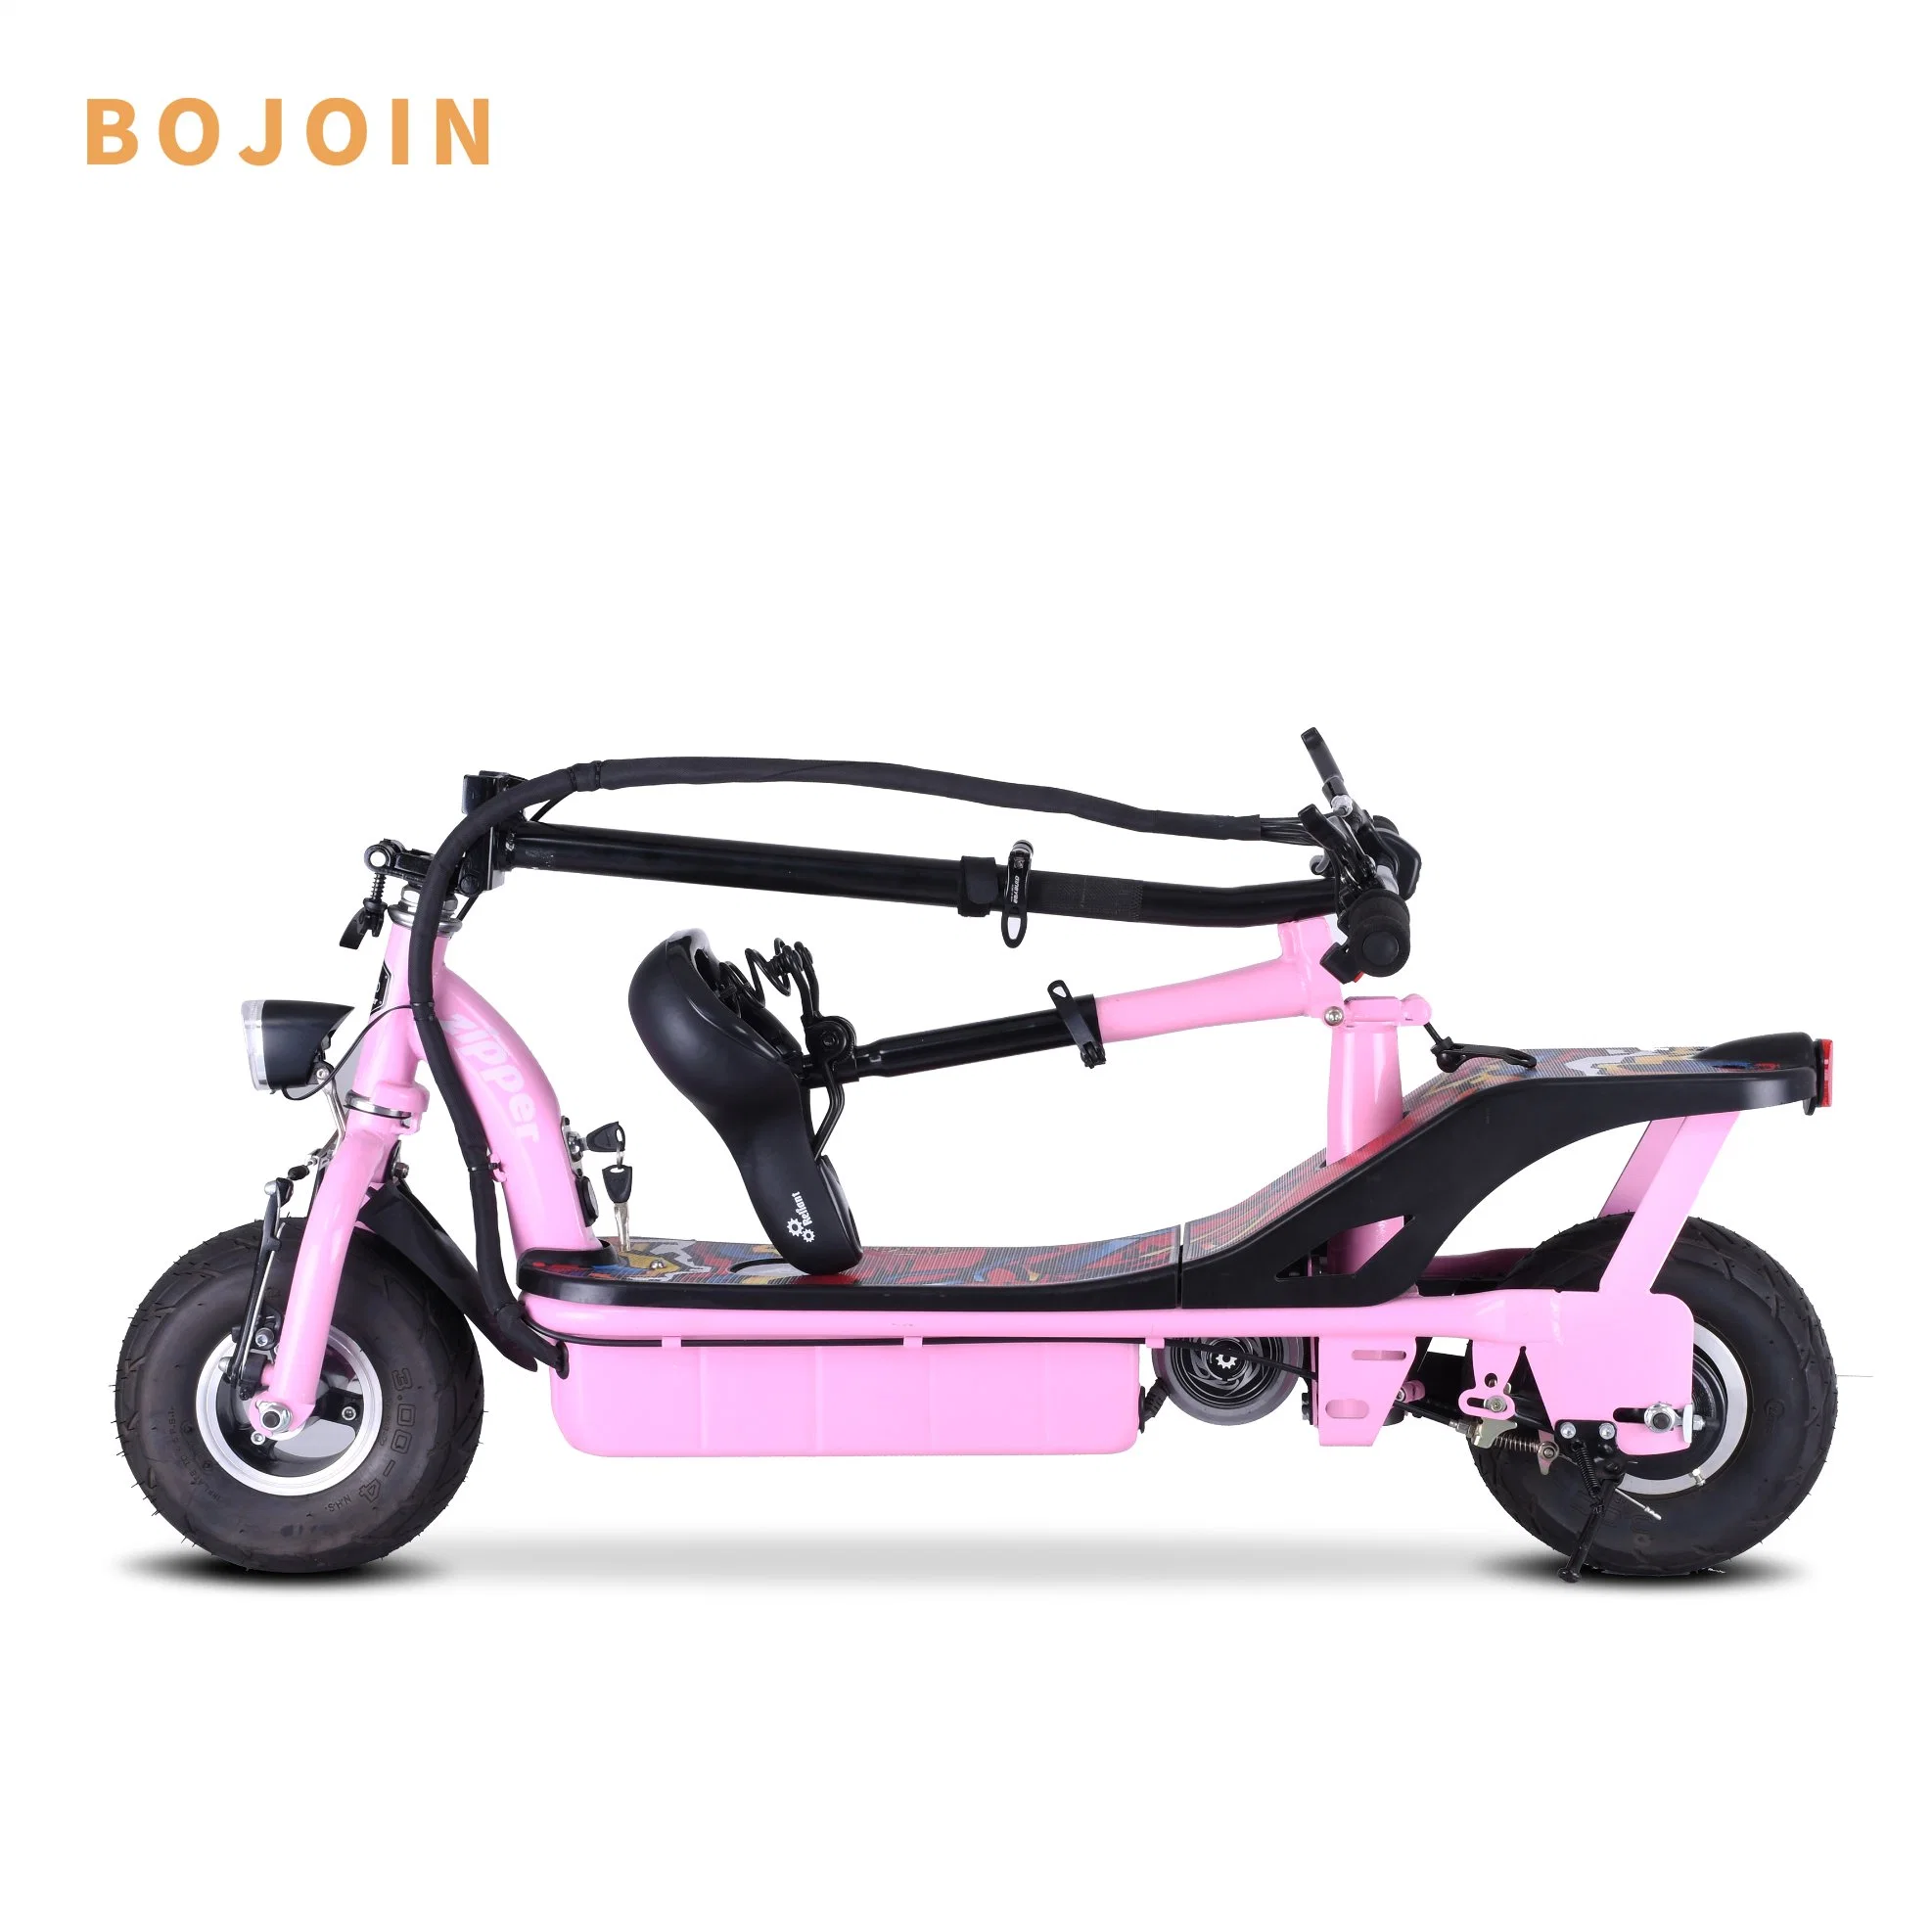 2021 Fashionable Newest Popular CE Certificate of Chinese New Electric Classic Scooter Mini Electric Scooter S4